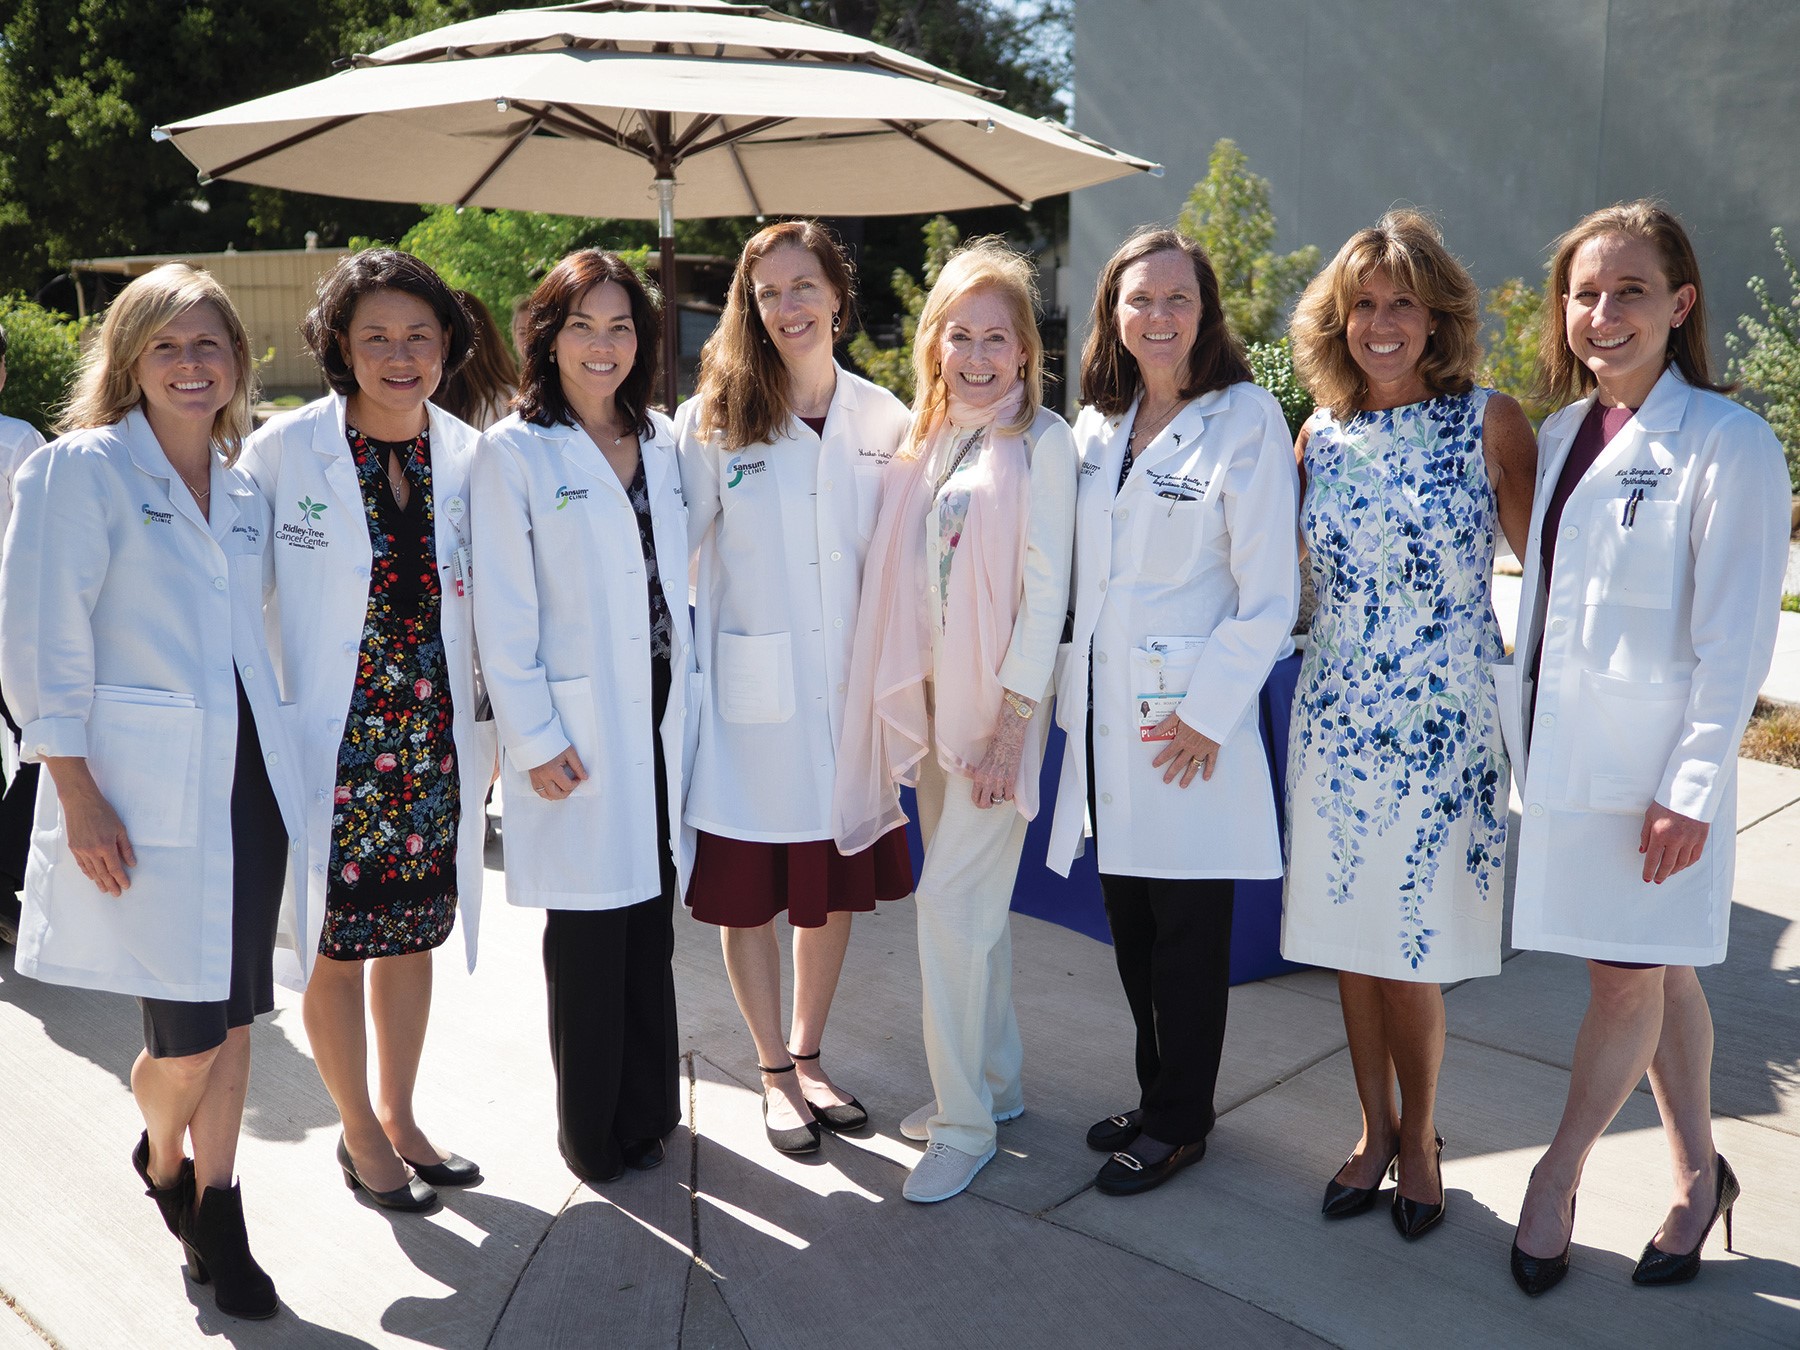 Julie Nadel (center in pink scarf) with Dr. Marjorie Newman (second from right) and the panelists from the May 2019 Spring into Good Health event hosted by the Women’s Council of Sansum Clinic. Drs. Alexandra Rogers, Rosa Choi, Toni Meyers, Heather Terbell, Mary-Louise Scully and Mica Bergman.